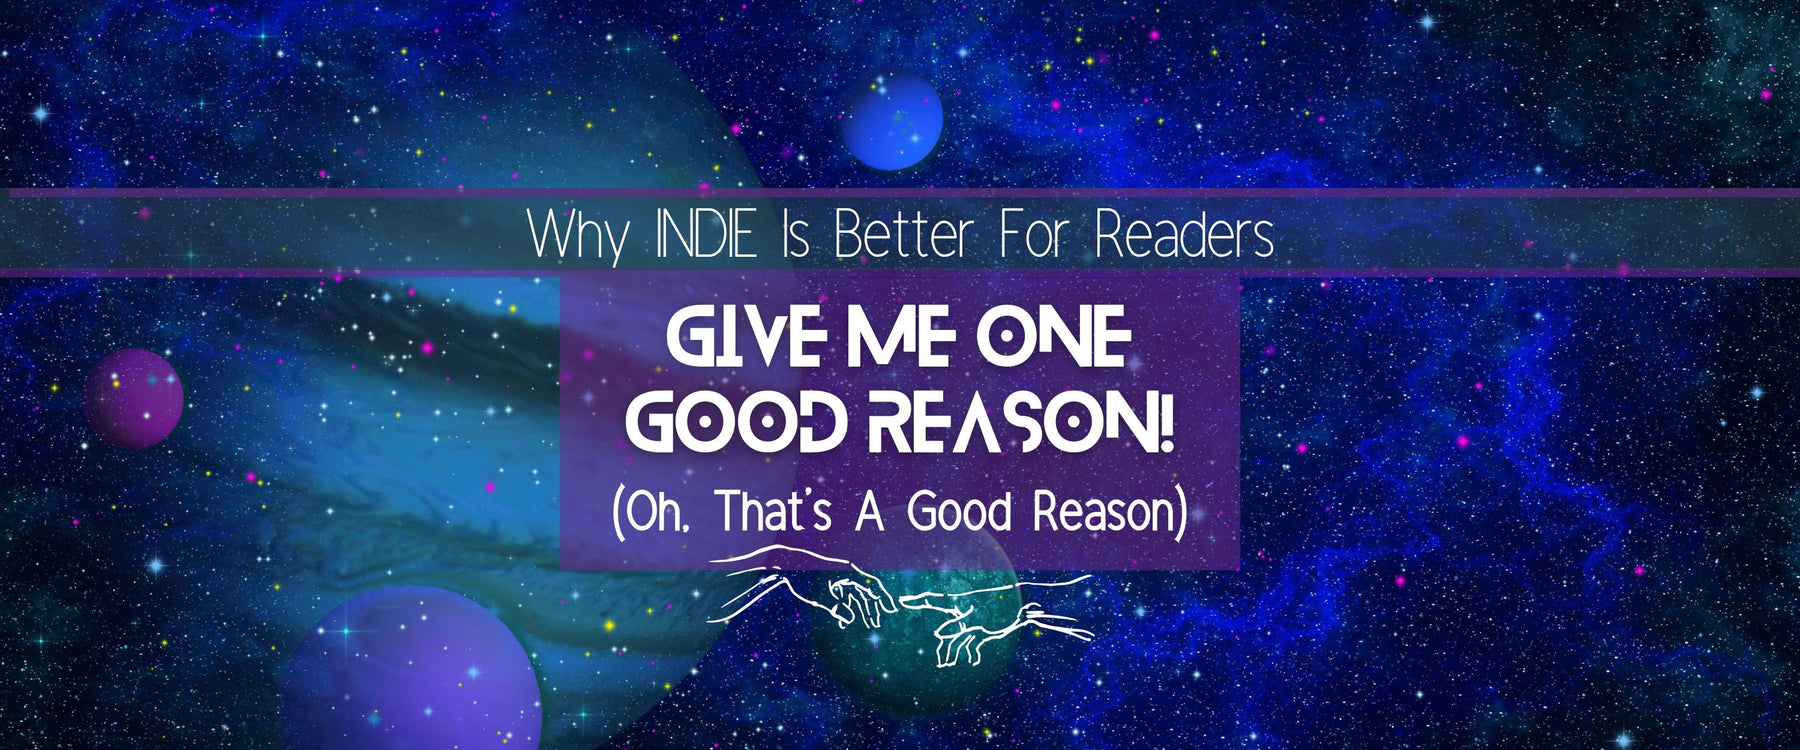 Give Me One Good Reason!